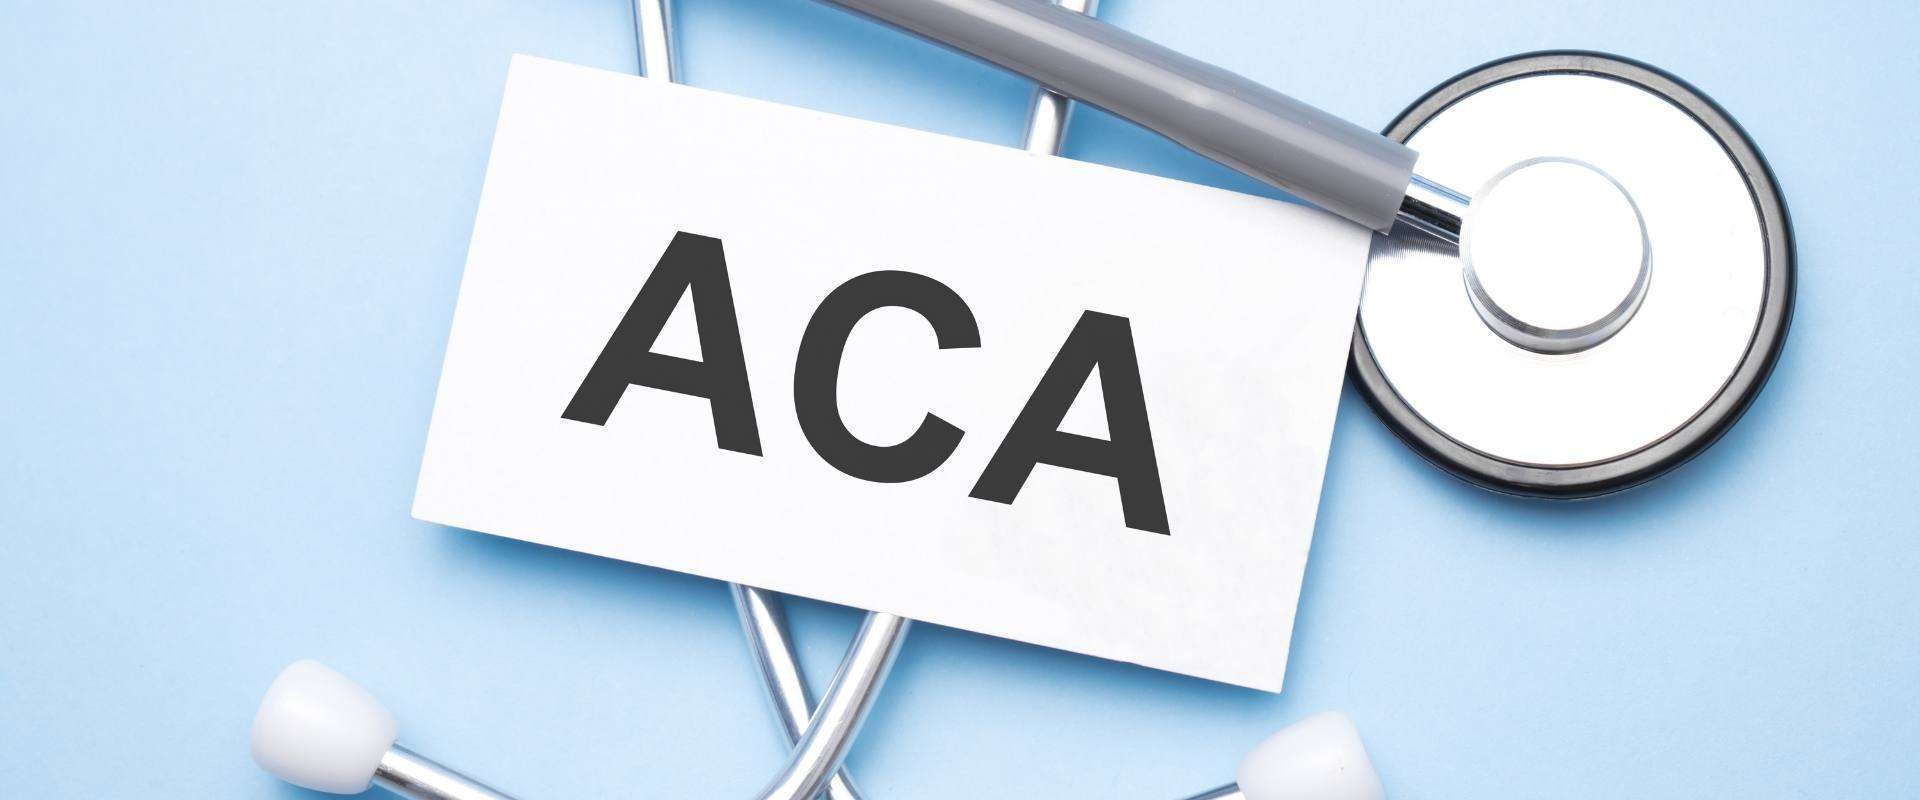 ACA Reporting Requirements 2021-2022